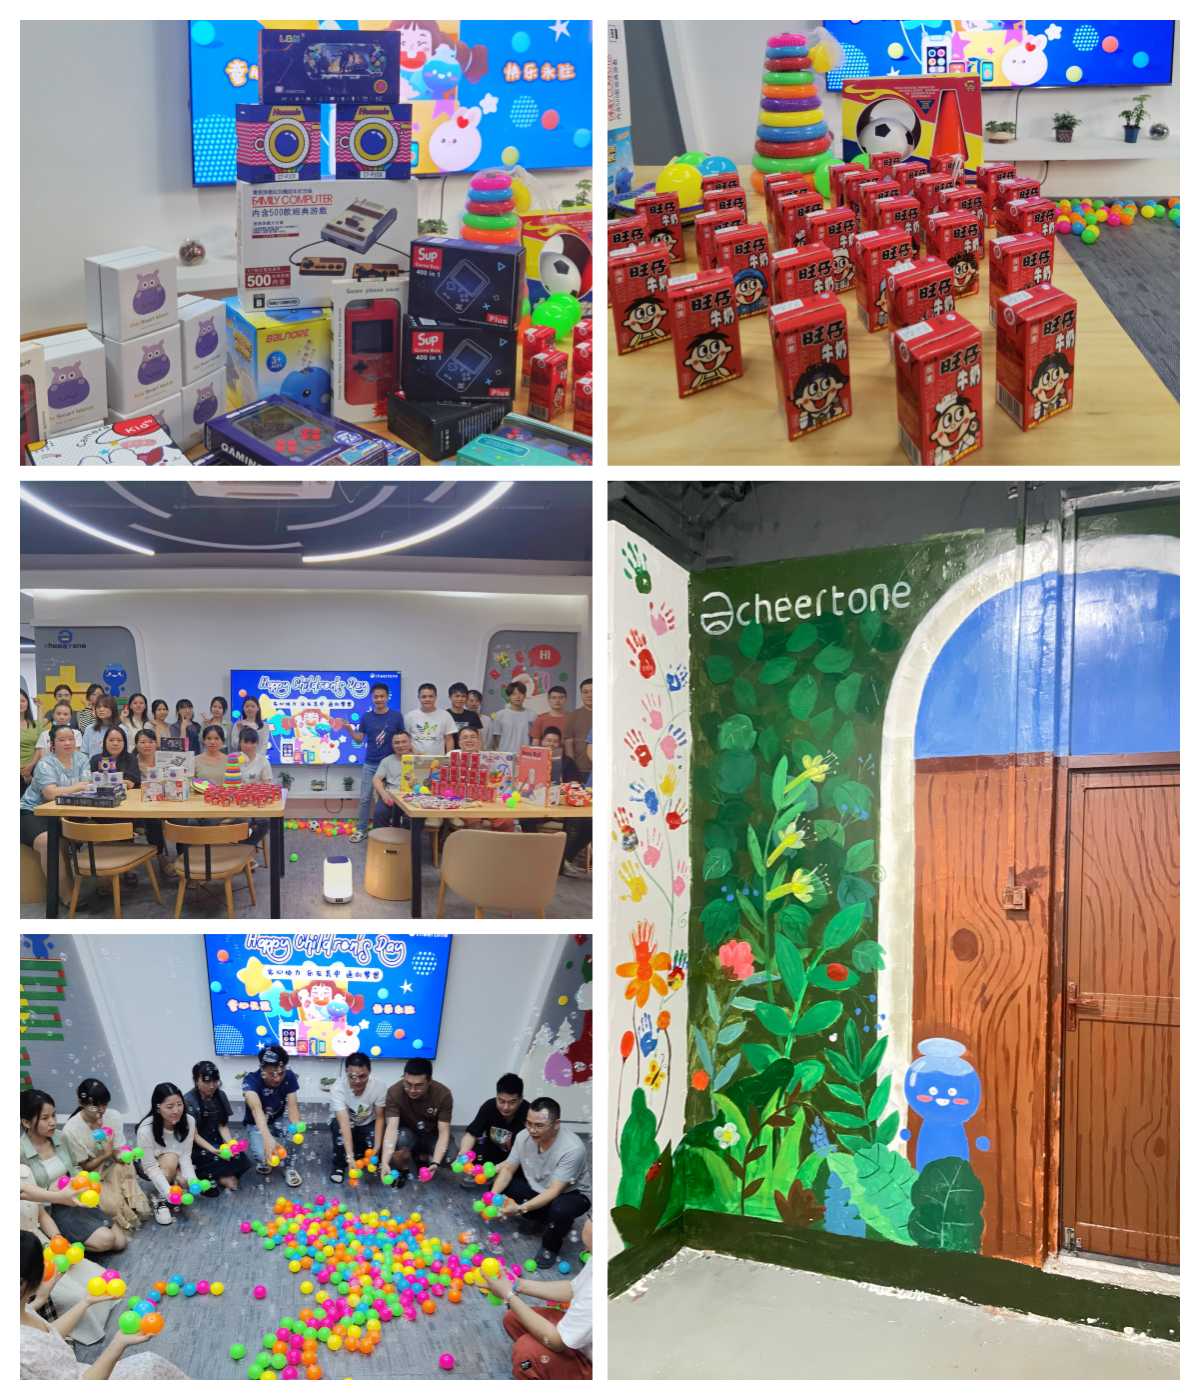 Kids Educational  Toy Manufacturer in China-Cheertone Technology-News Picture 01